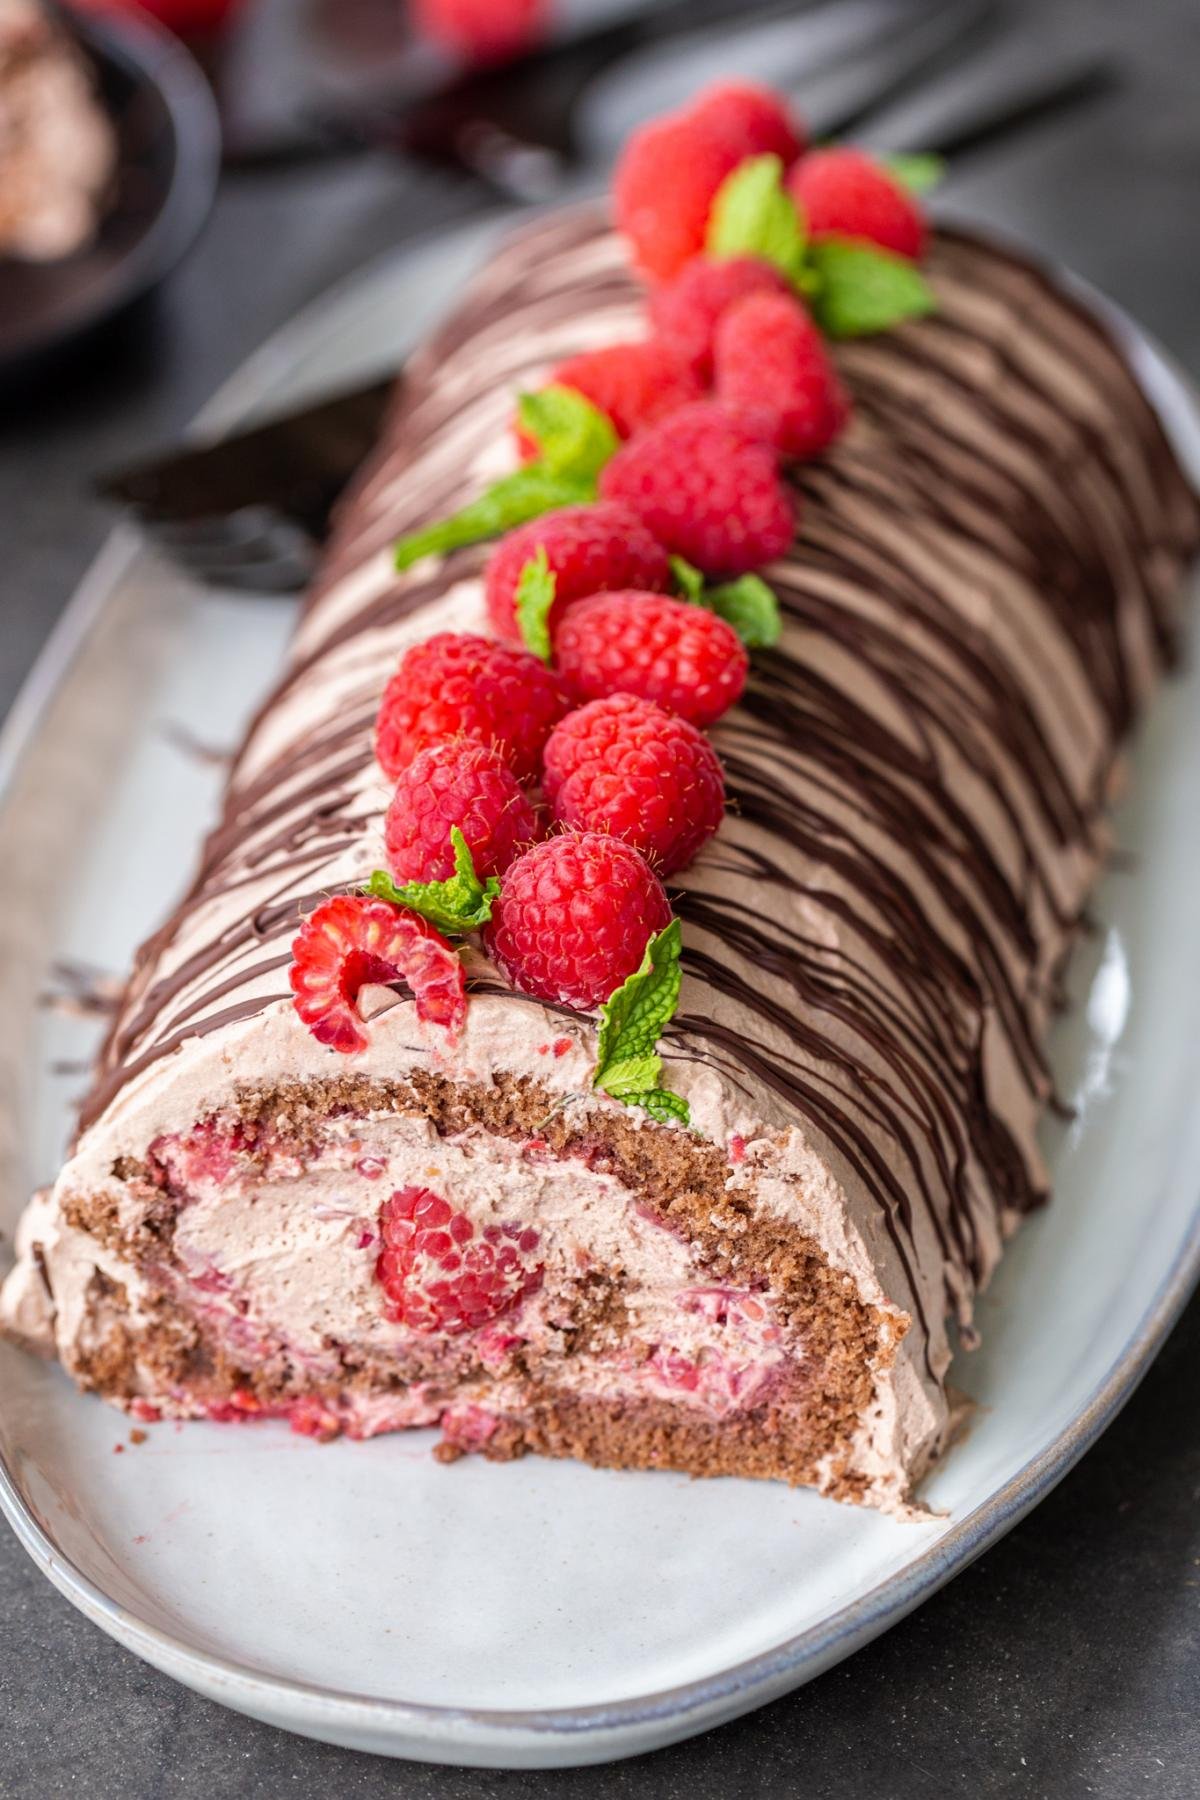 Raspberry Chocolate Swiss Roll - Spend With Pennies